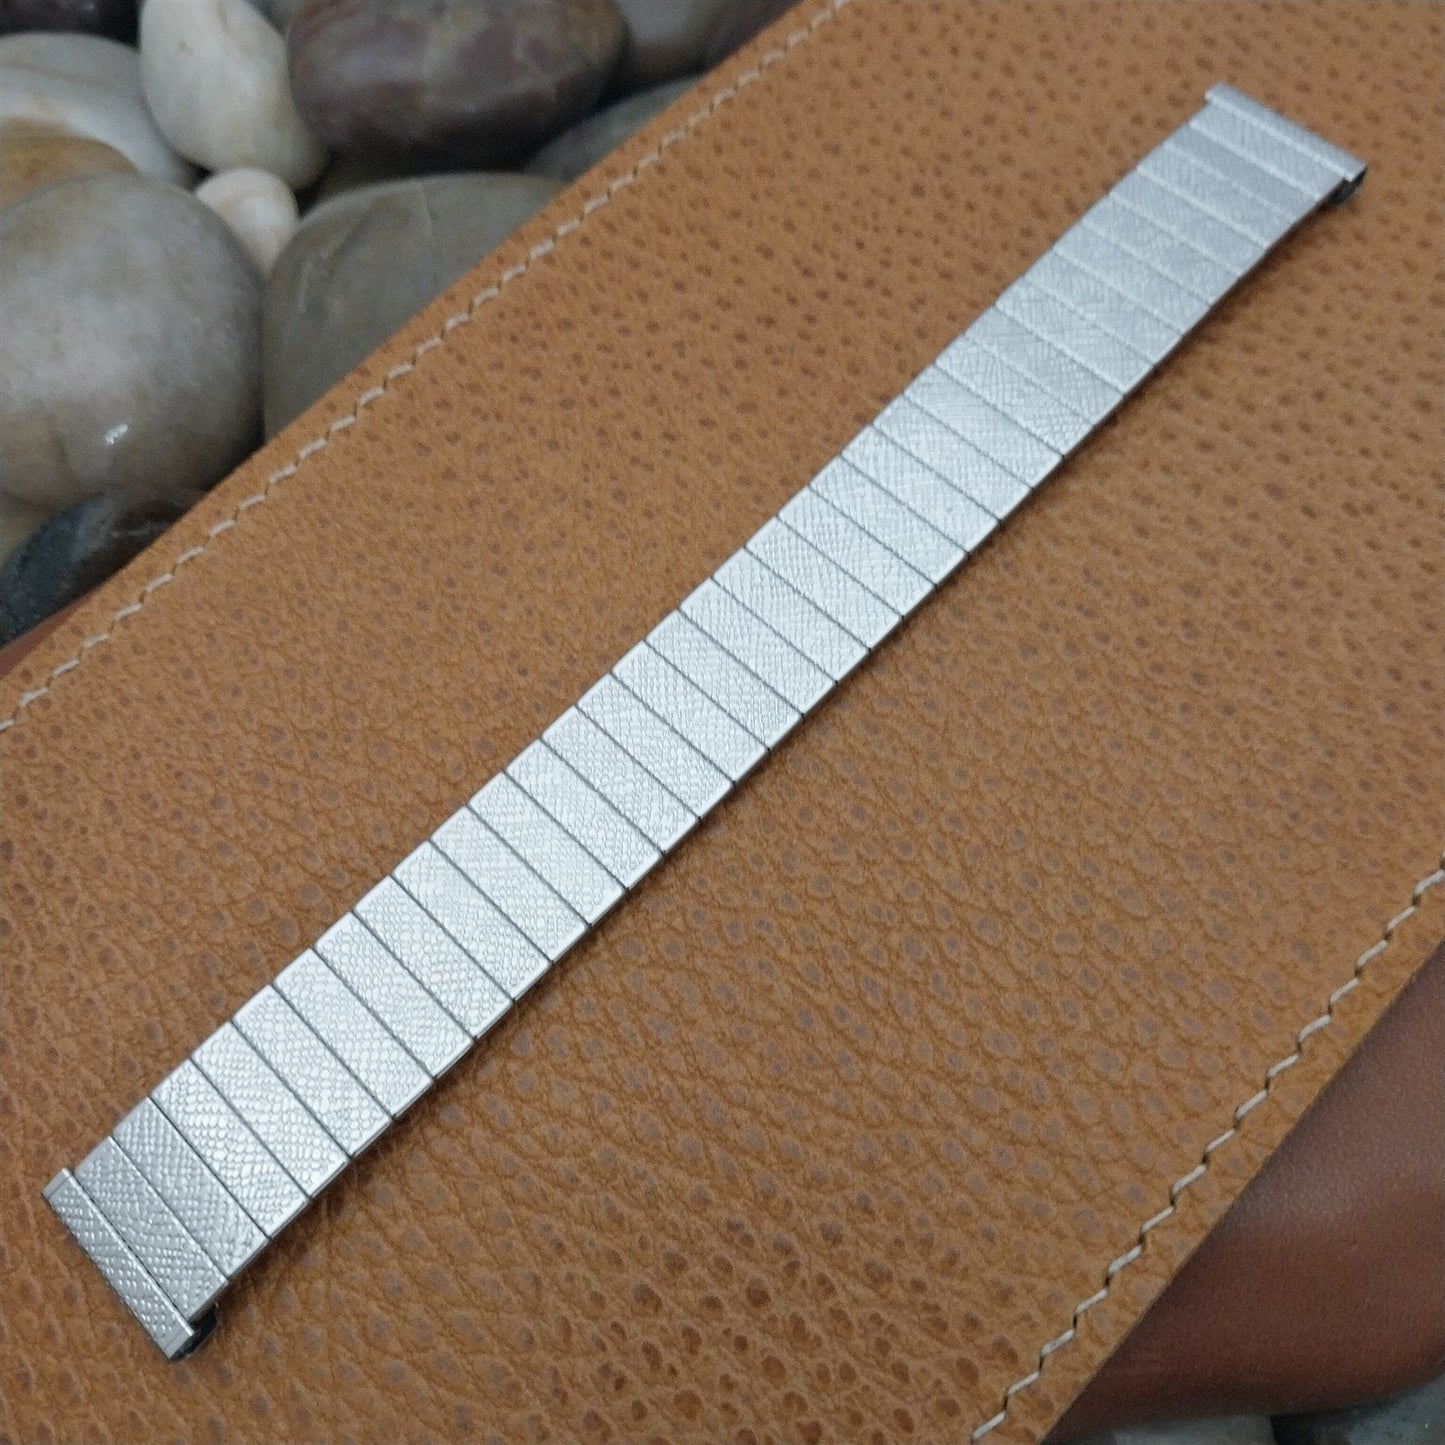 17.2mm Uniflex Slim Stainless Steel Stretch Expansion 1960s Vintage Watch Band